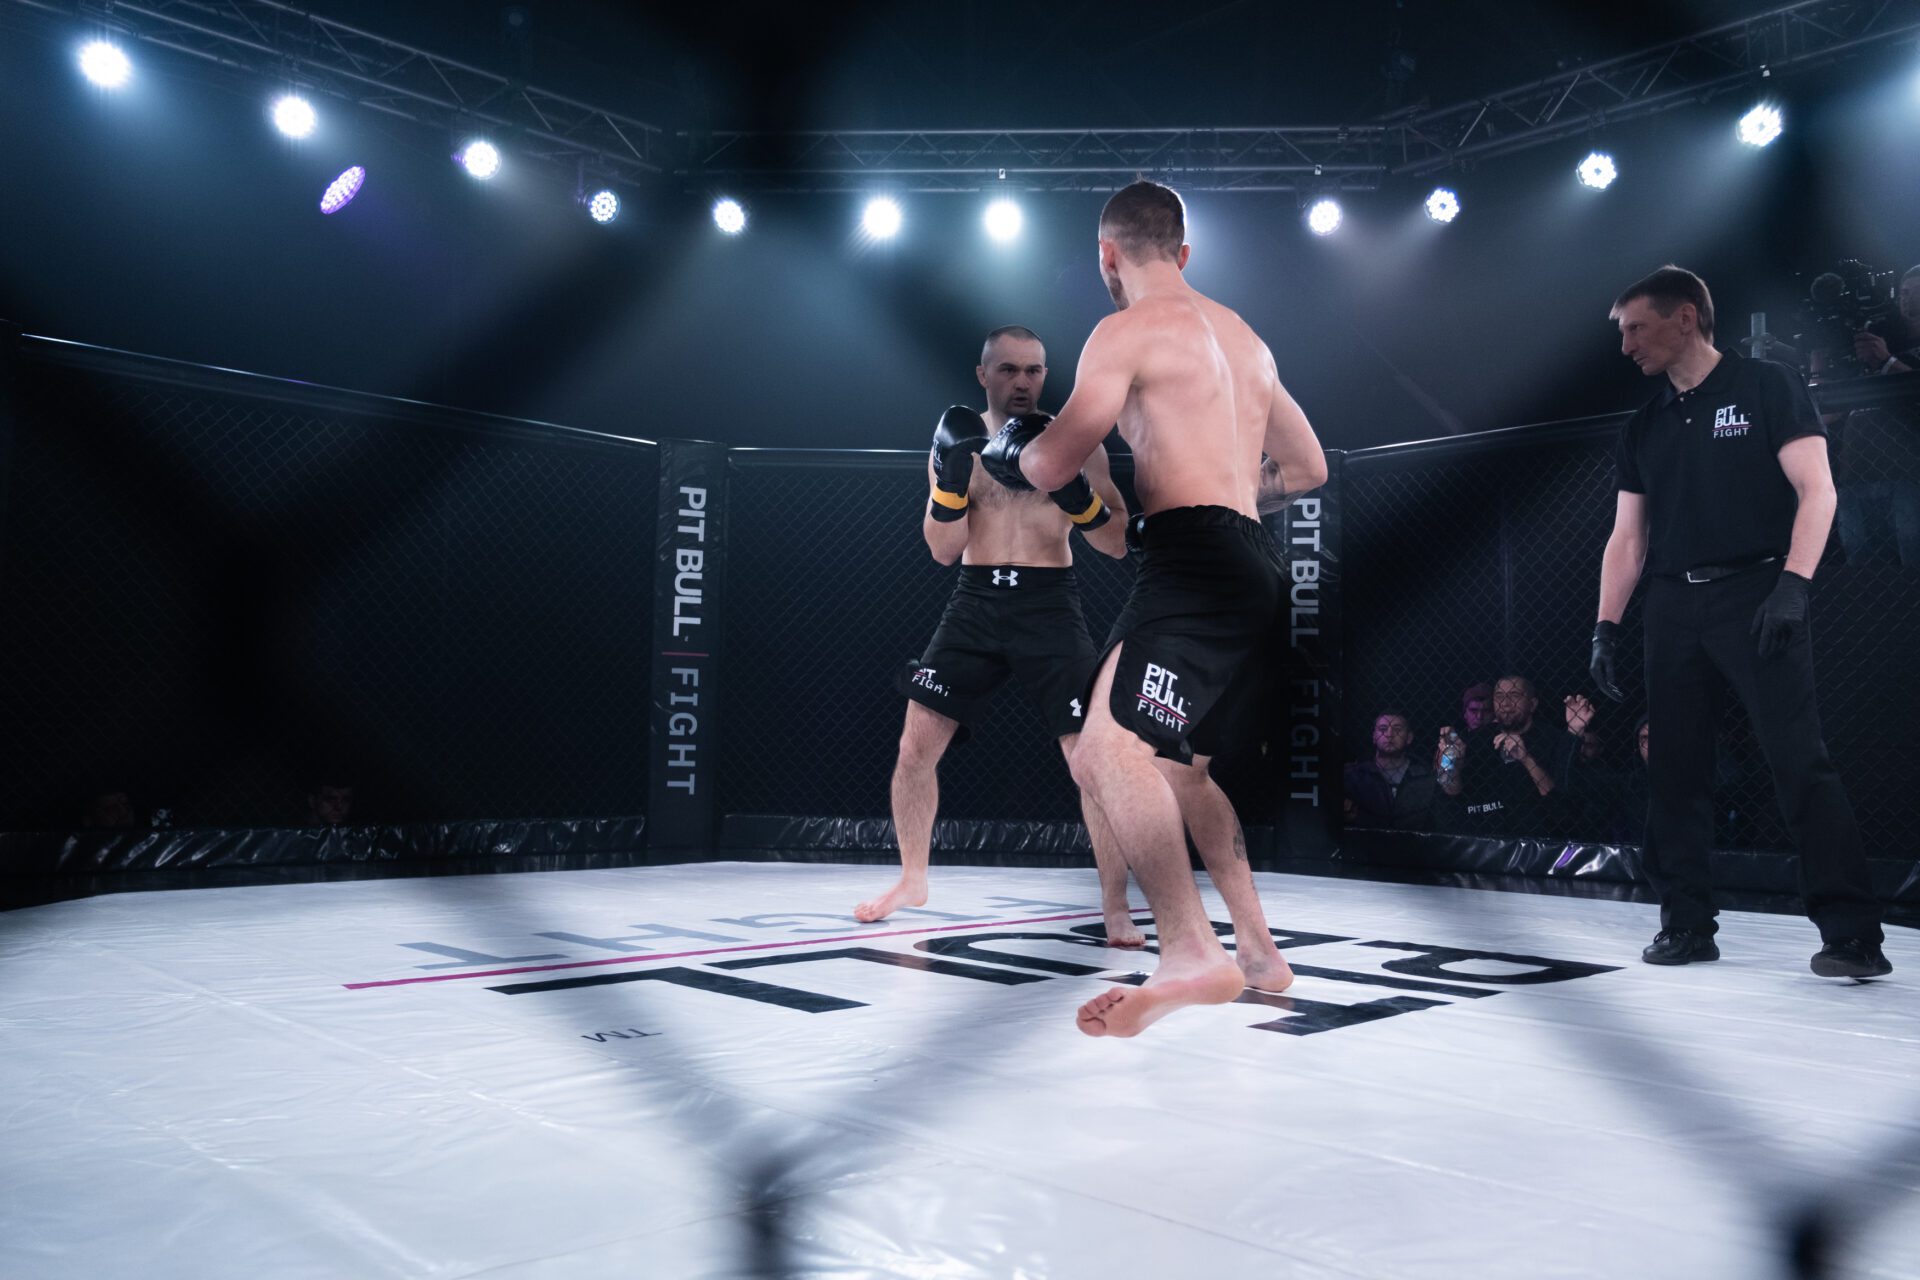 P.A.L.A.C.H vs Experienced MMA Fighter: Watch the First YouTube Video of Pit Bull Fight With the Ukrainian Military Taking Part